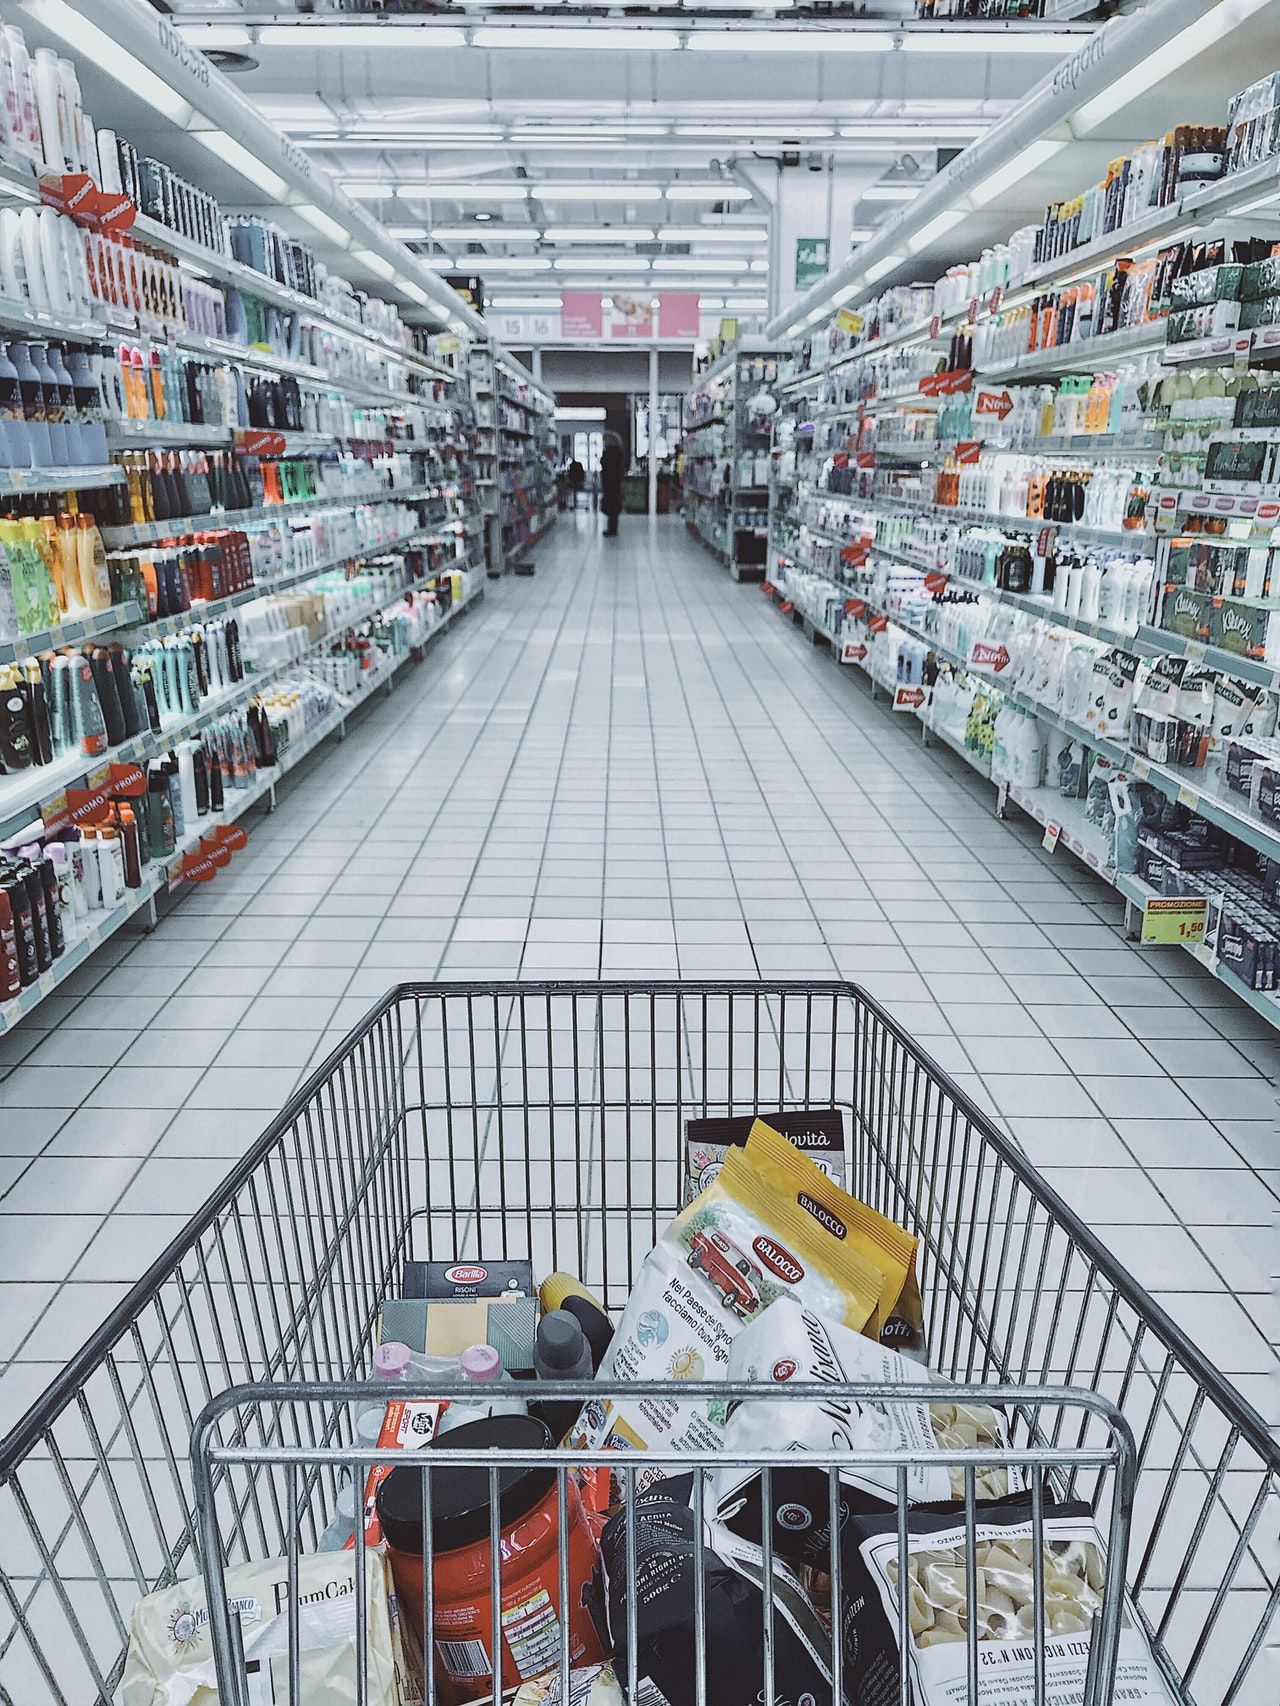 Image of a full shopping cart in a store aisle